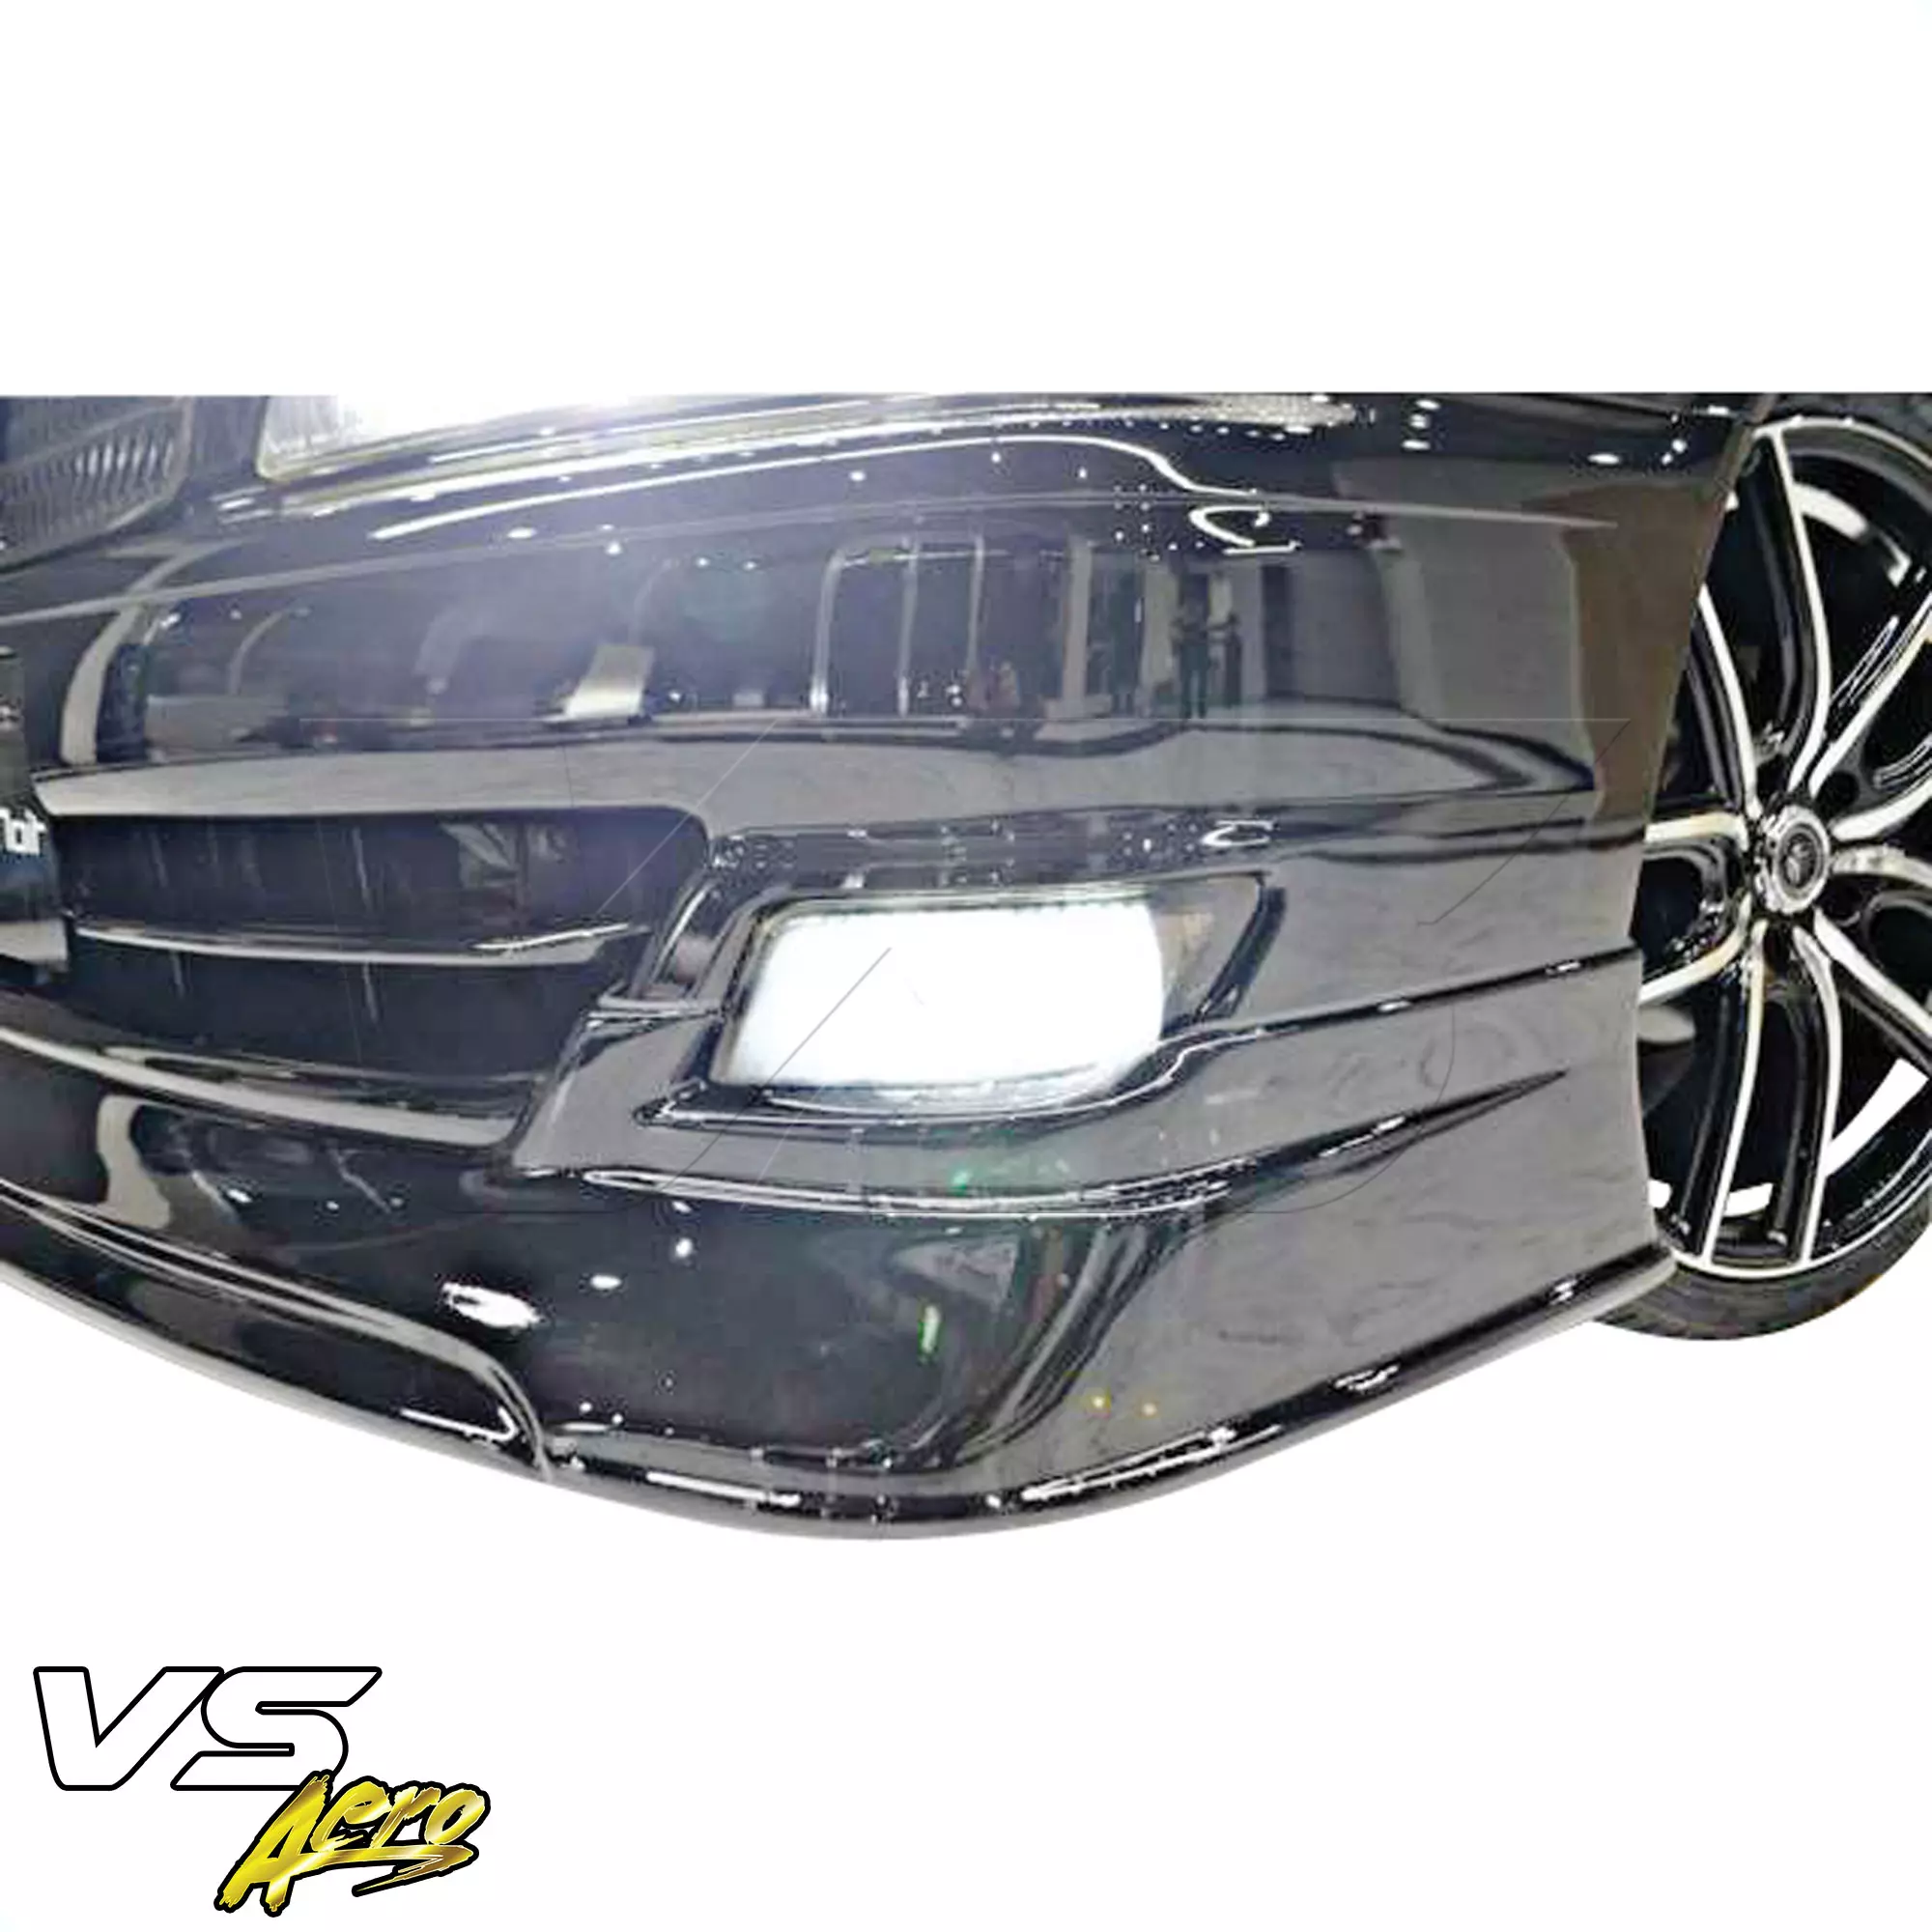 VSaero FRP TRAU Late Front Lip Valance > Toyota Chaser JZX100 1999-2000 - Image 16